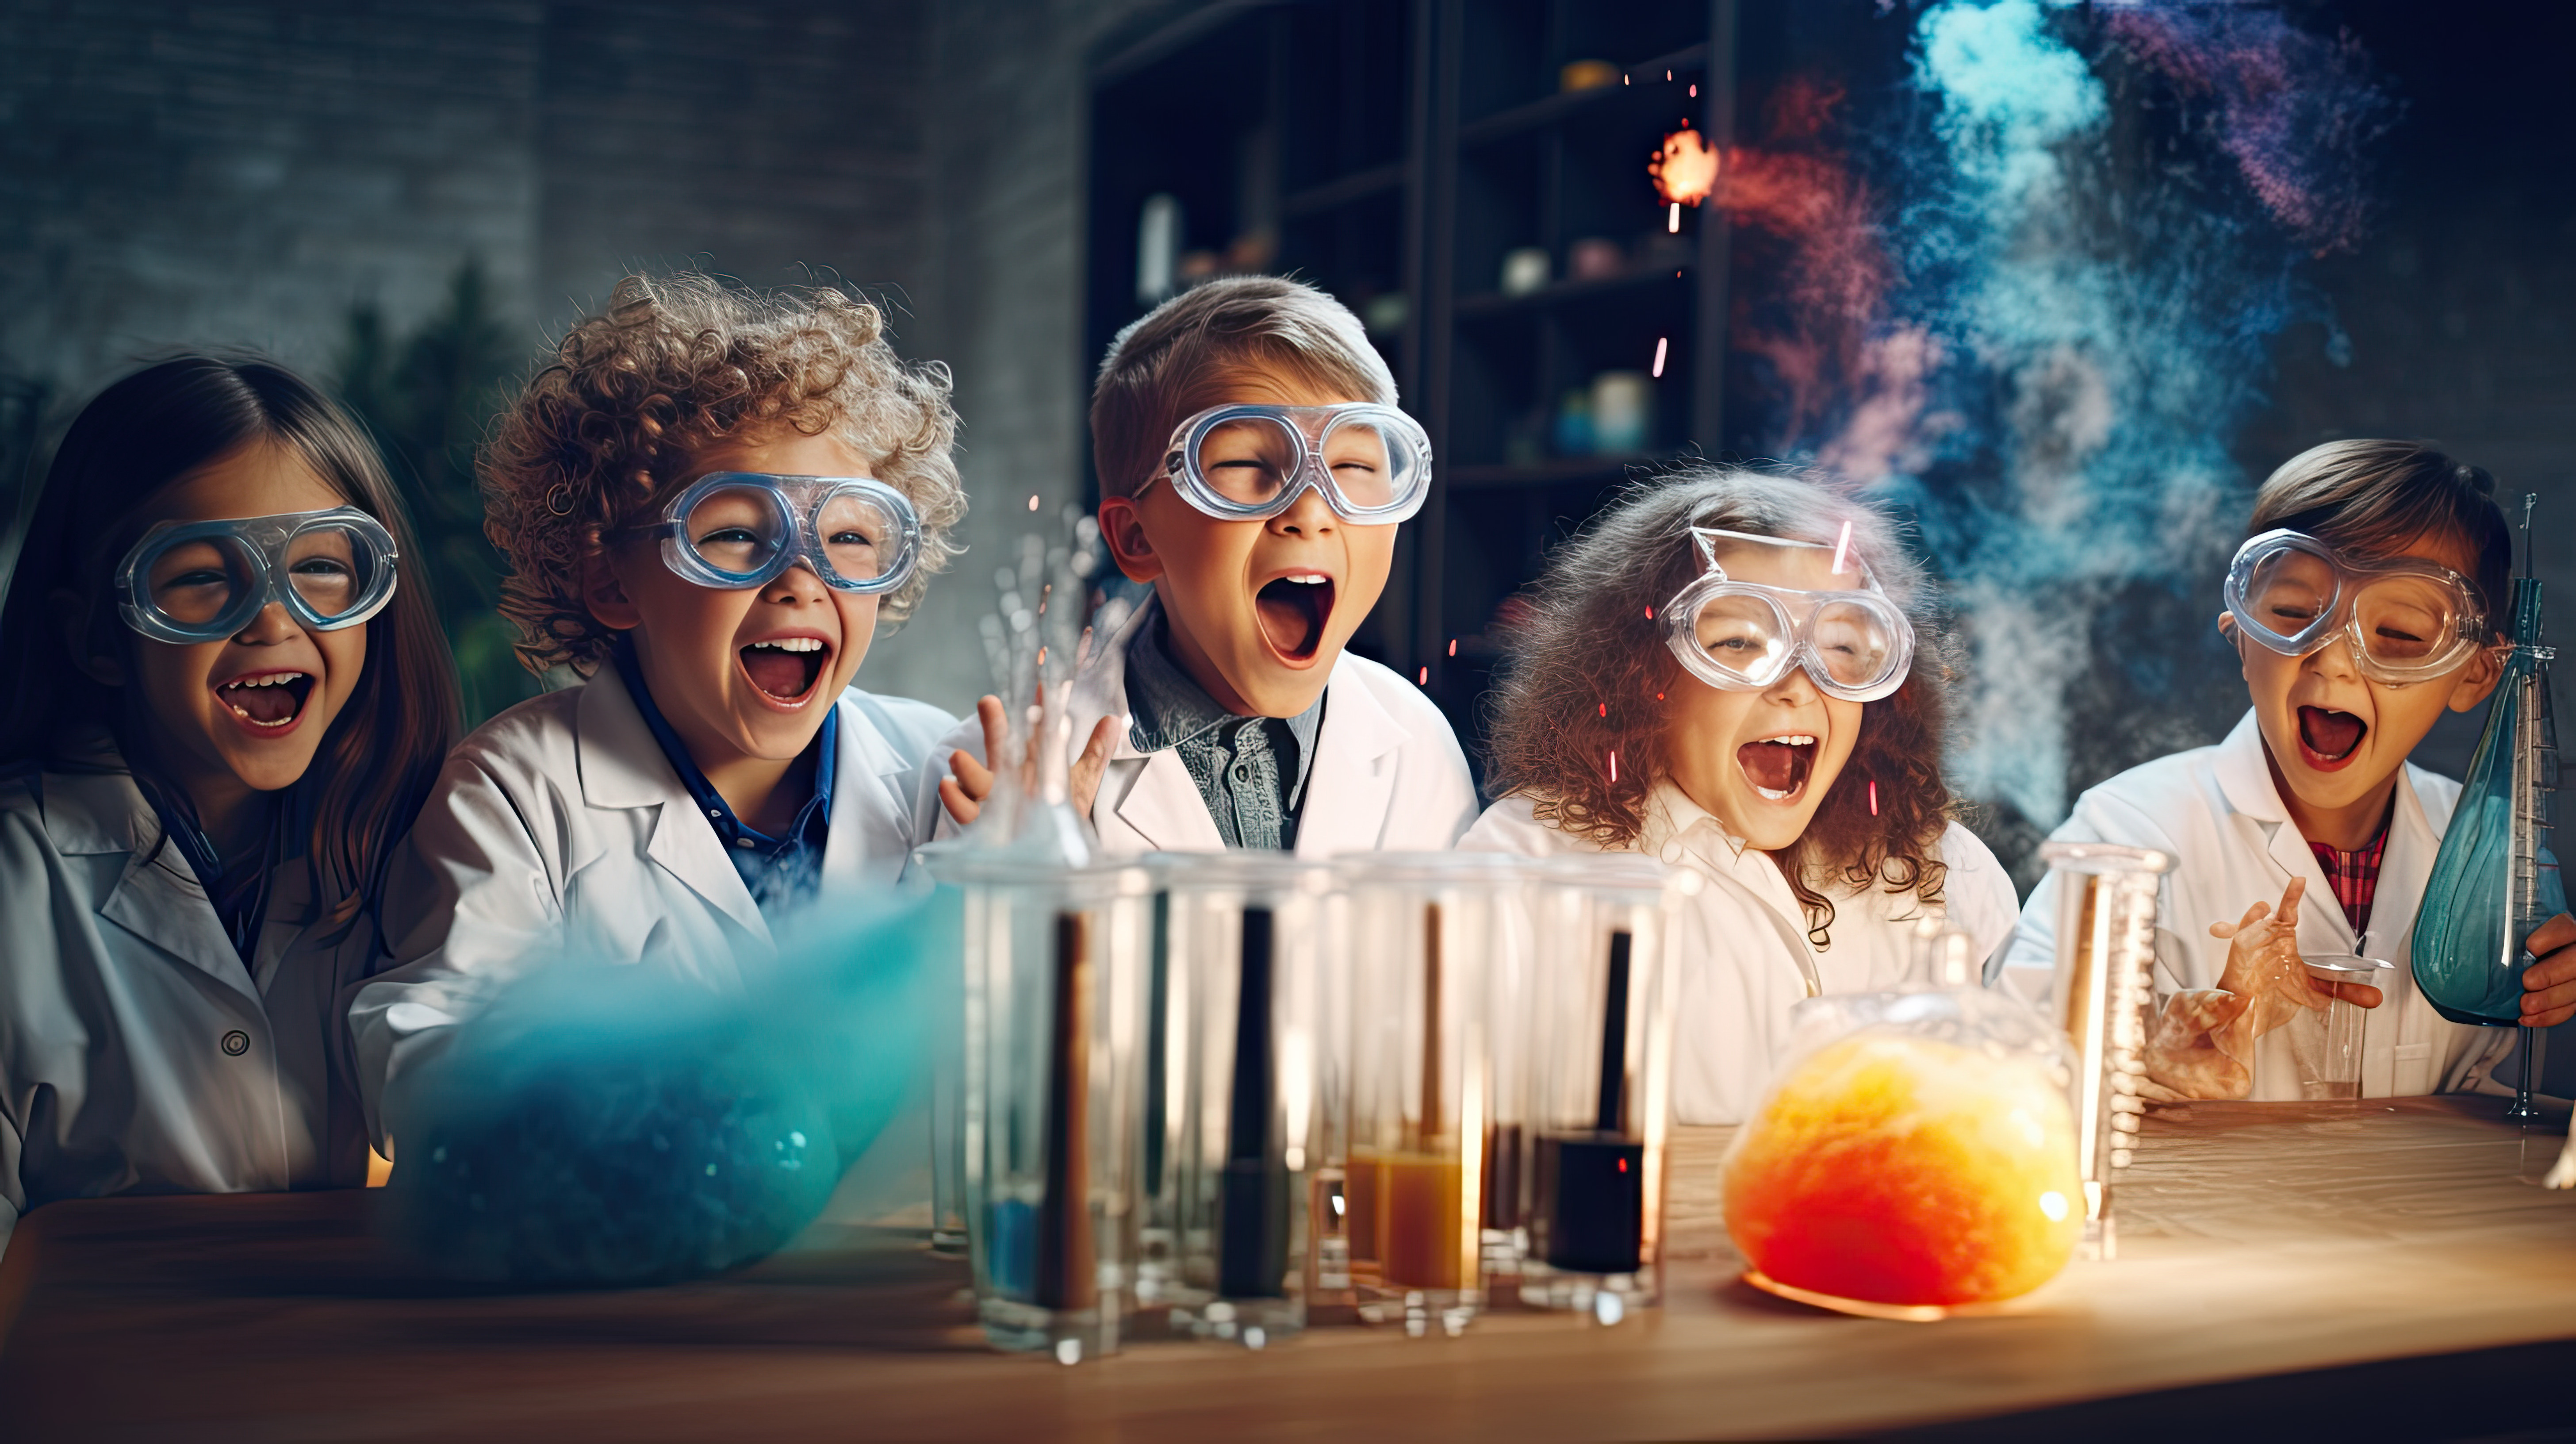 Image of 2 girls amd 3 boys wearing white lab coats and safety goggles smiling while looks at a table of science test tues and beakers.  One beaker contains orange liquid and smoke and another has blue smoke.  